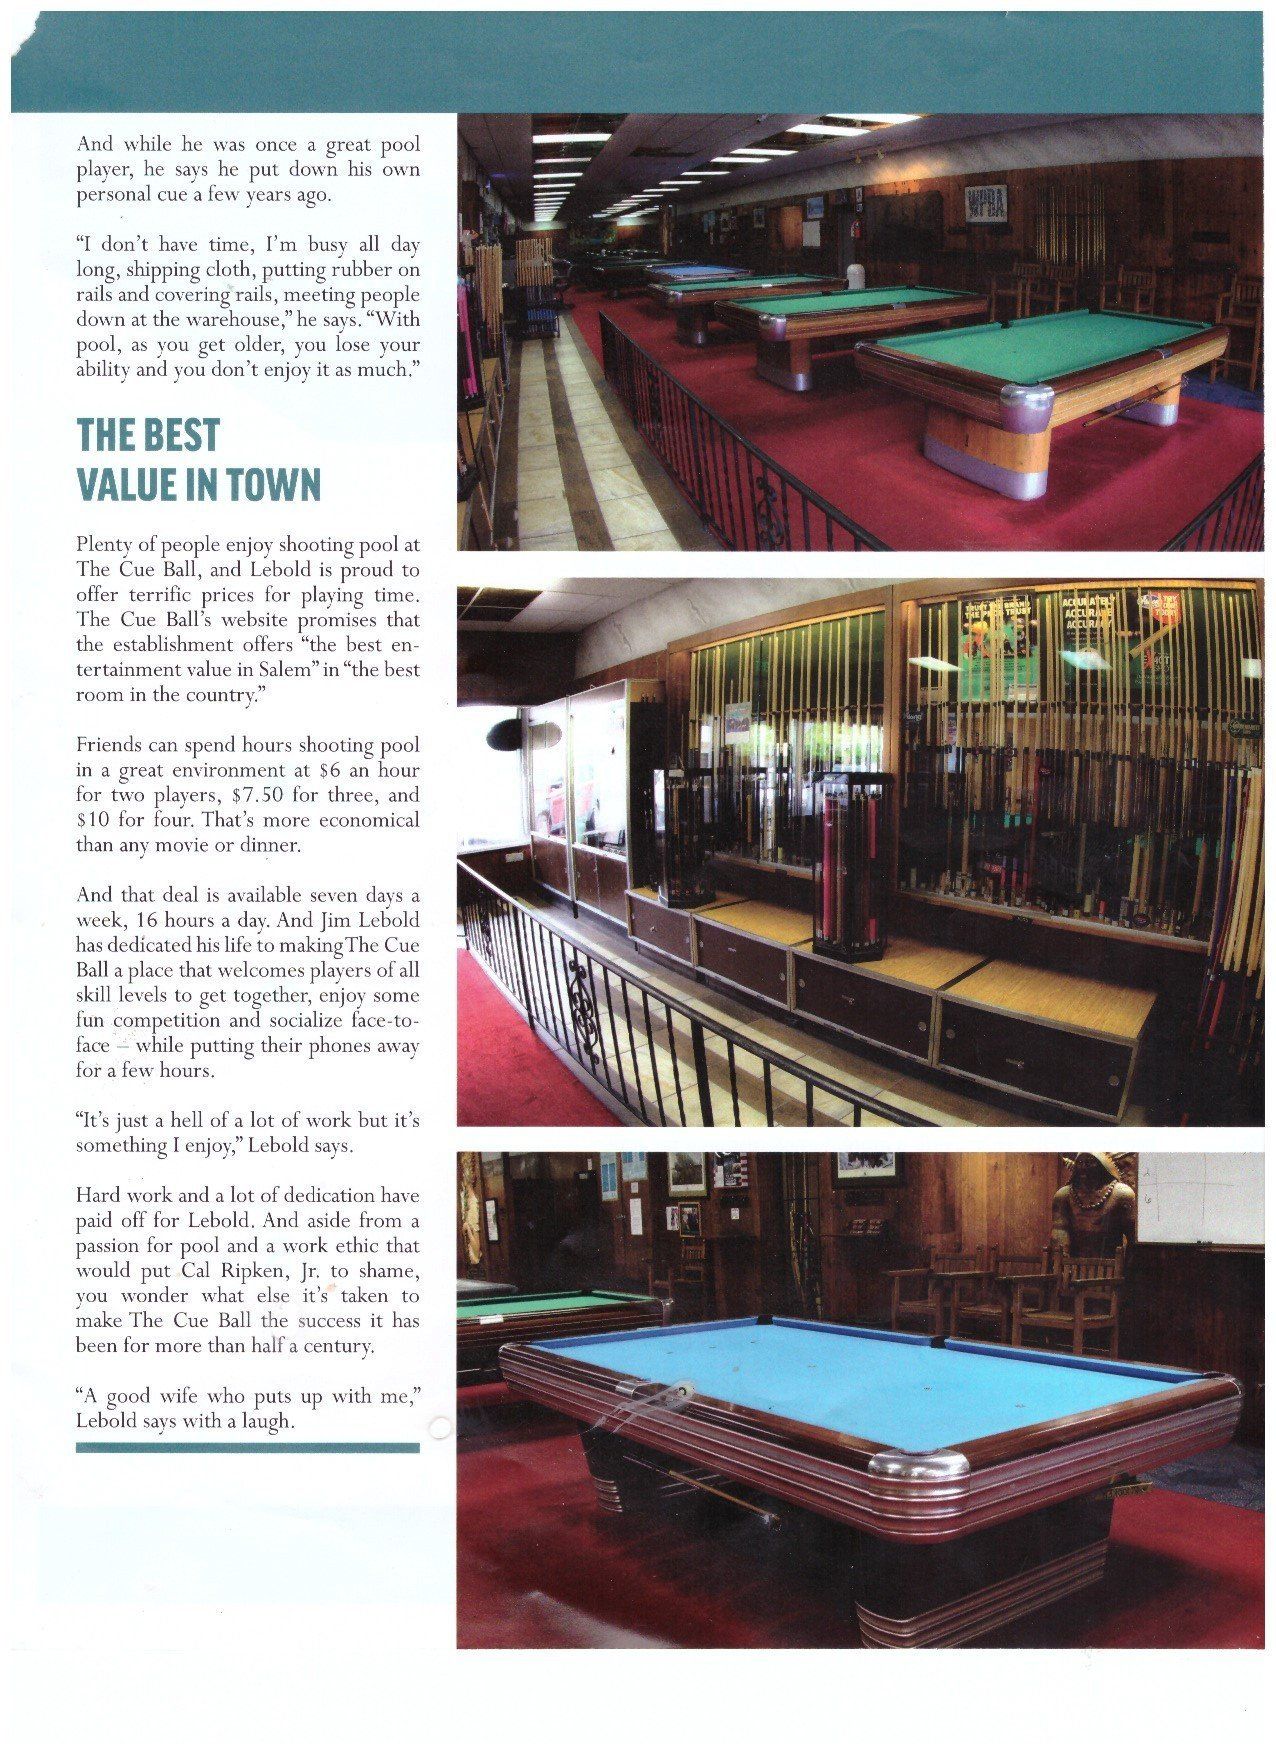 BCA Magazine Page 4 — Salem, OR — The Cue Ball